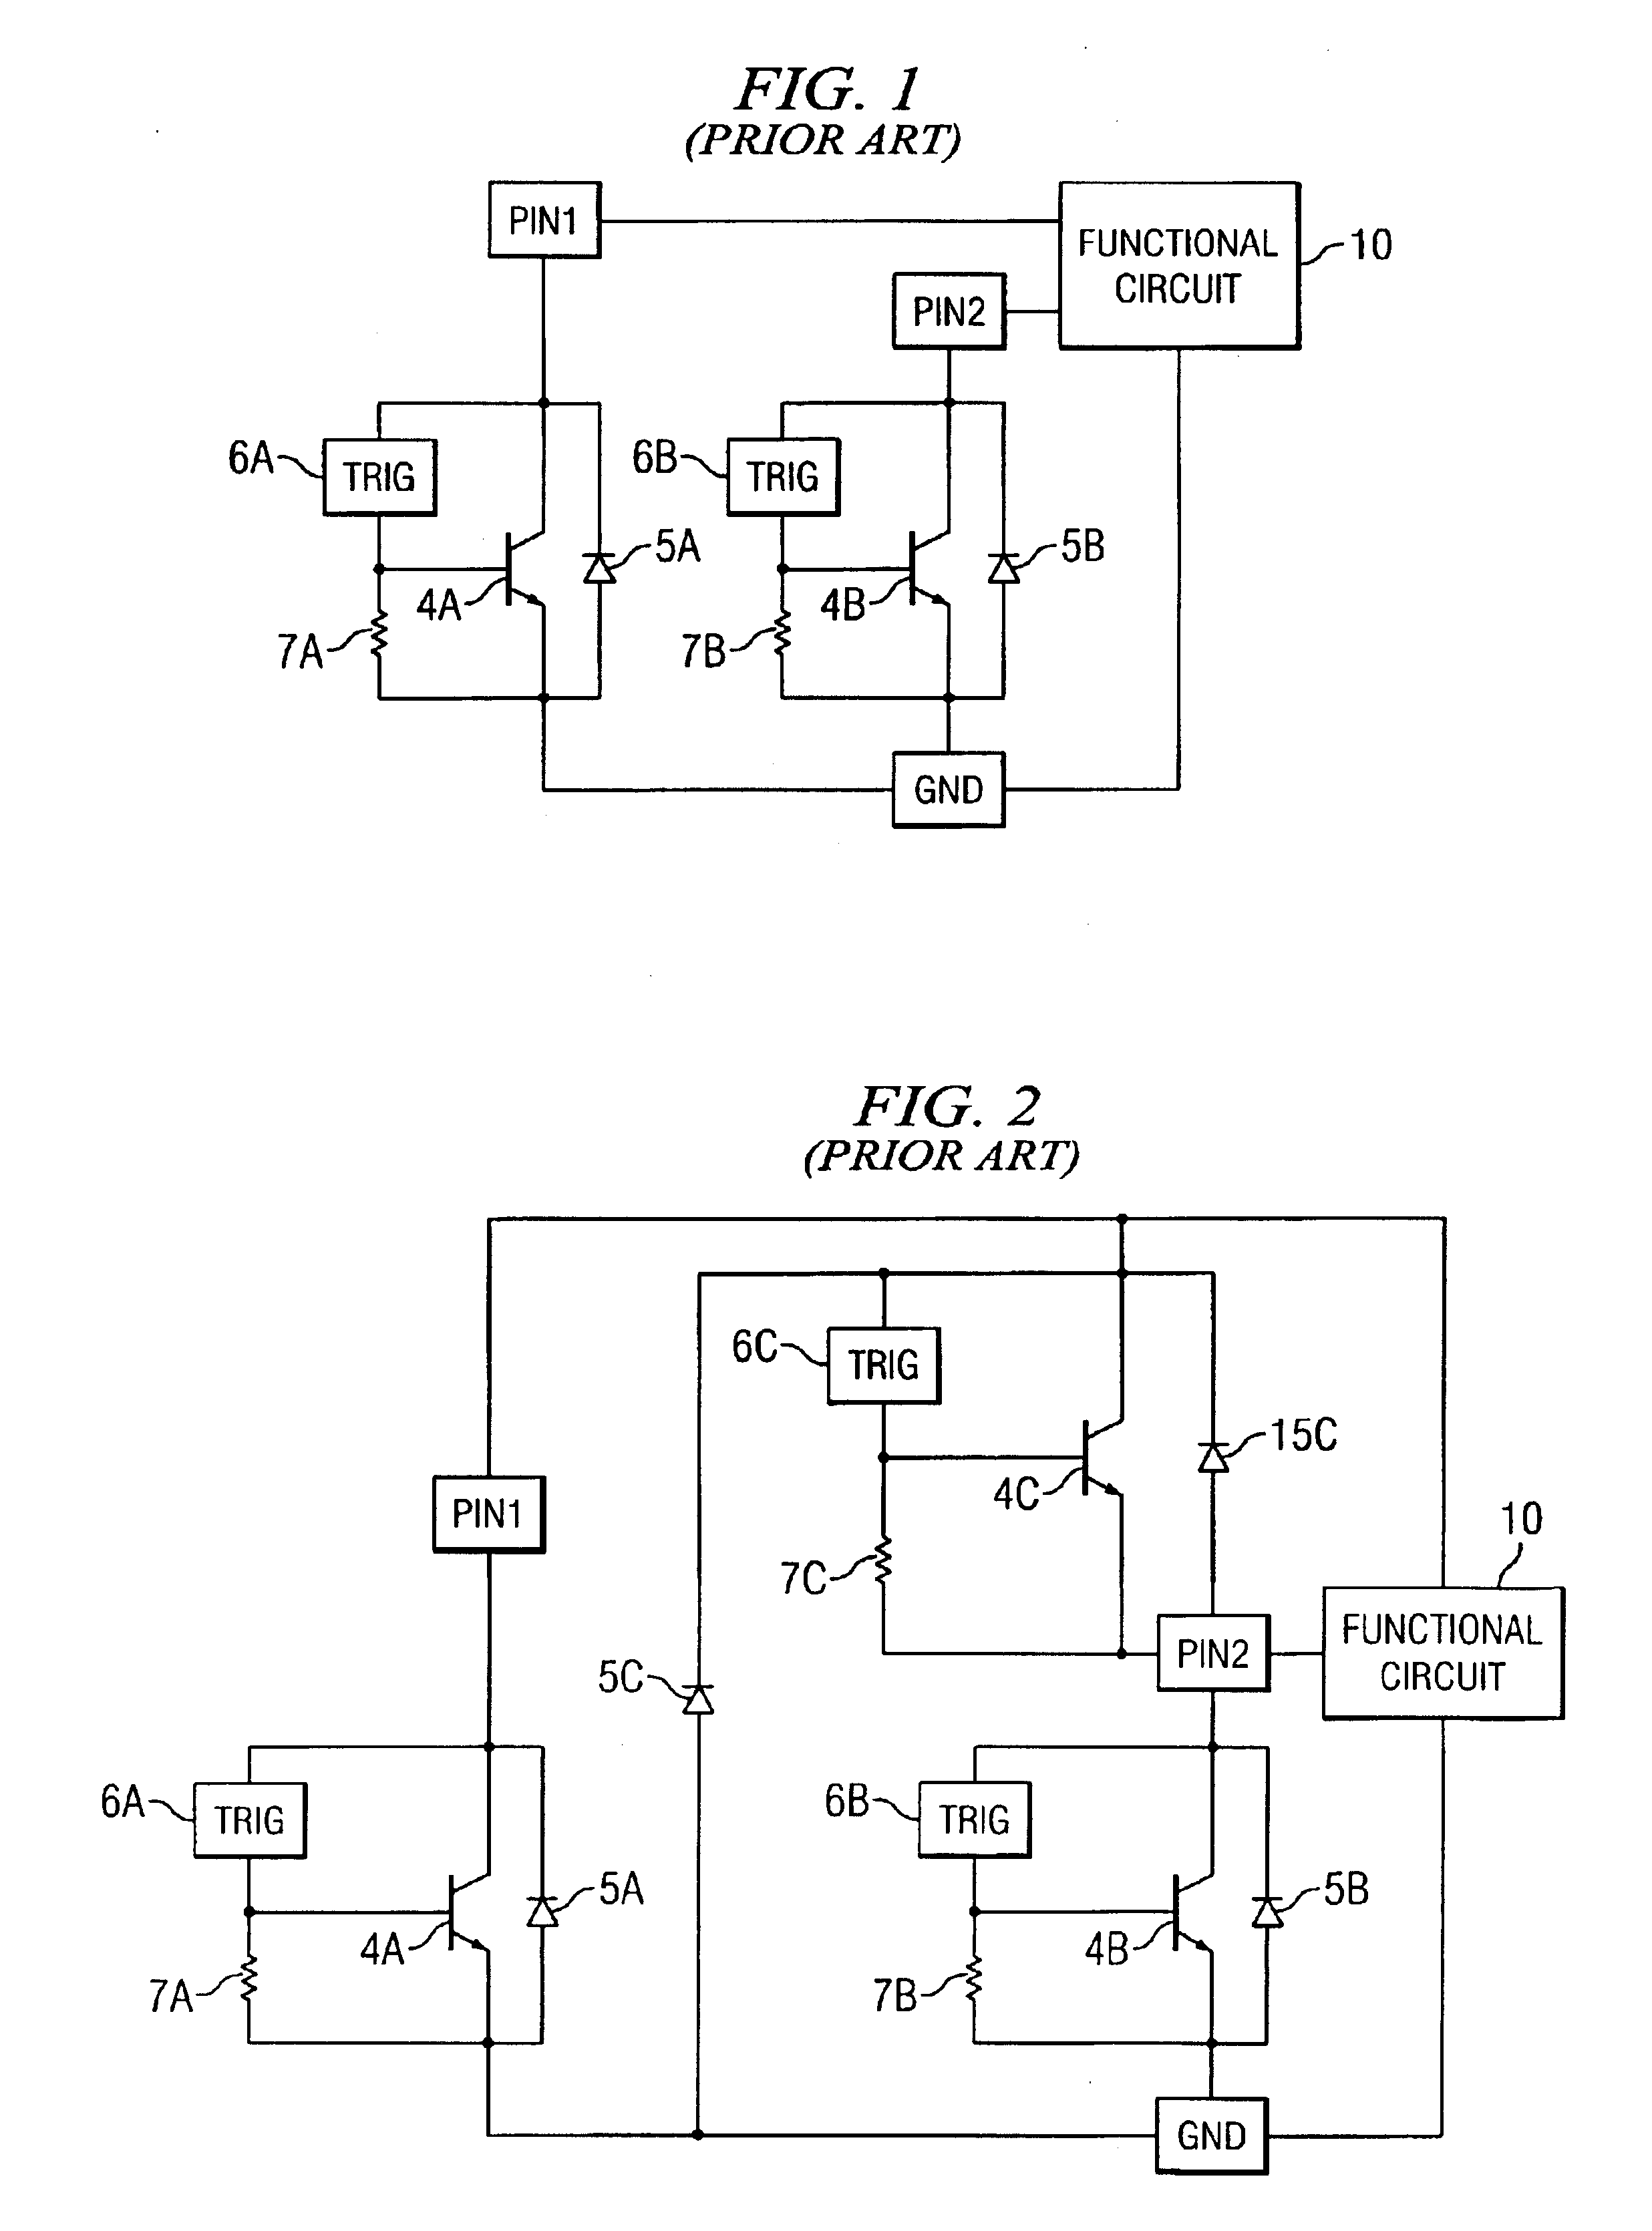 Efficient protection structure for reverse pin-to-pin electrostatic discharge